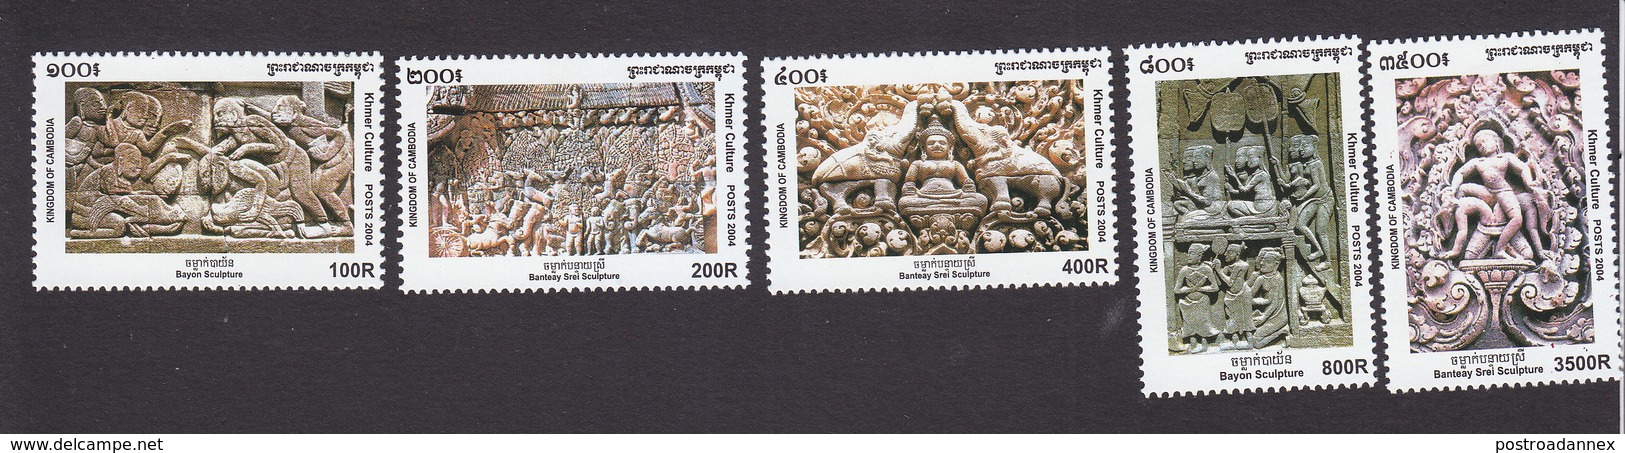 Cambodia, Scott #2210-2214, Mint Hinged, Khmer Culture, Issued 2004 - Cambodia